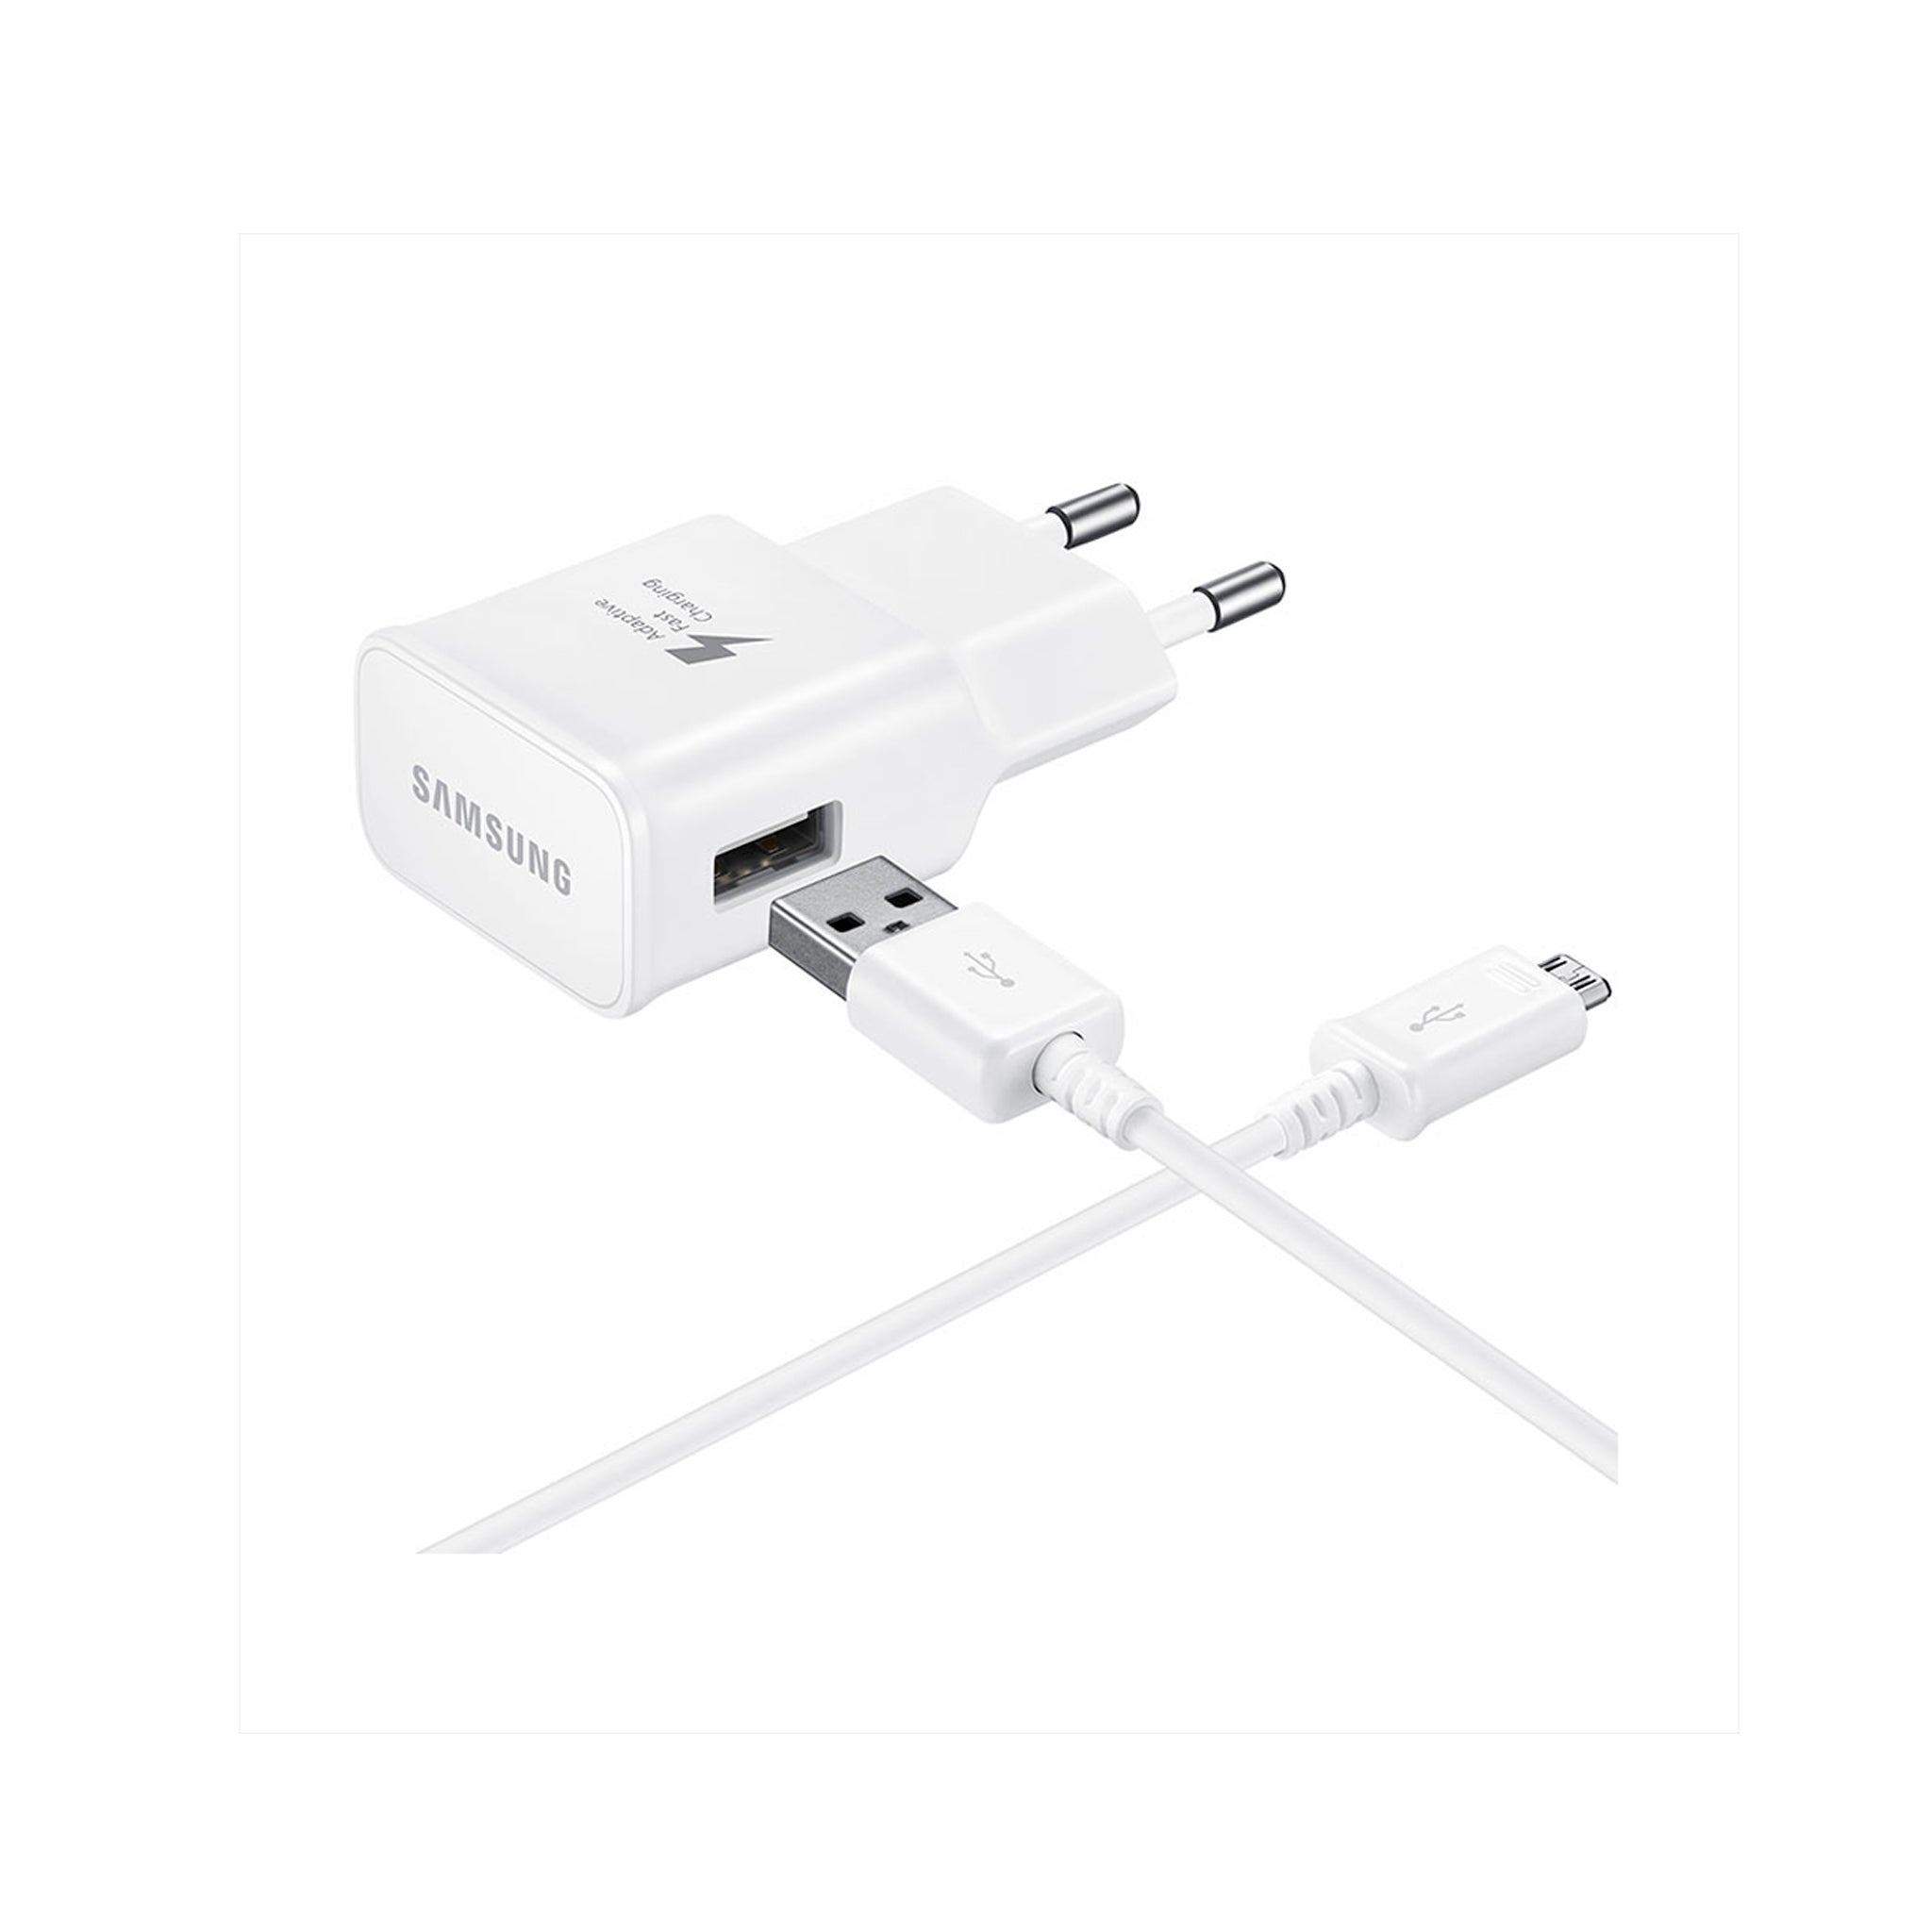 Samsung - Travel charger Fast Charge (10W) 2 Amps Detachable Micro Usb- ROUND PIN - White